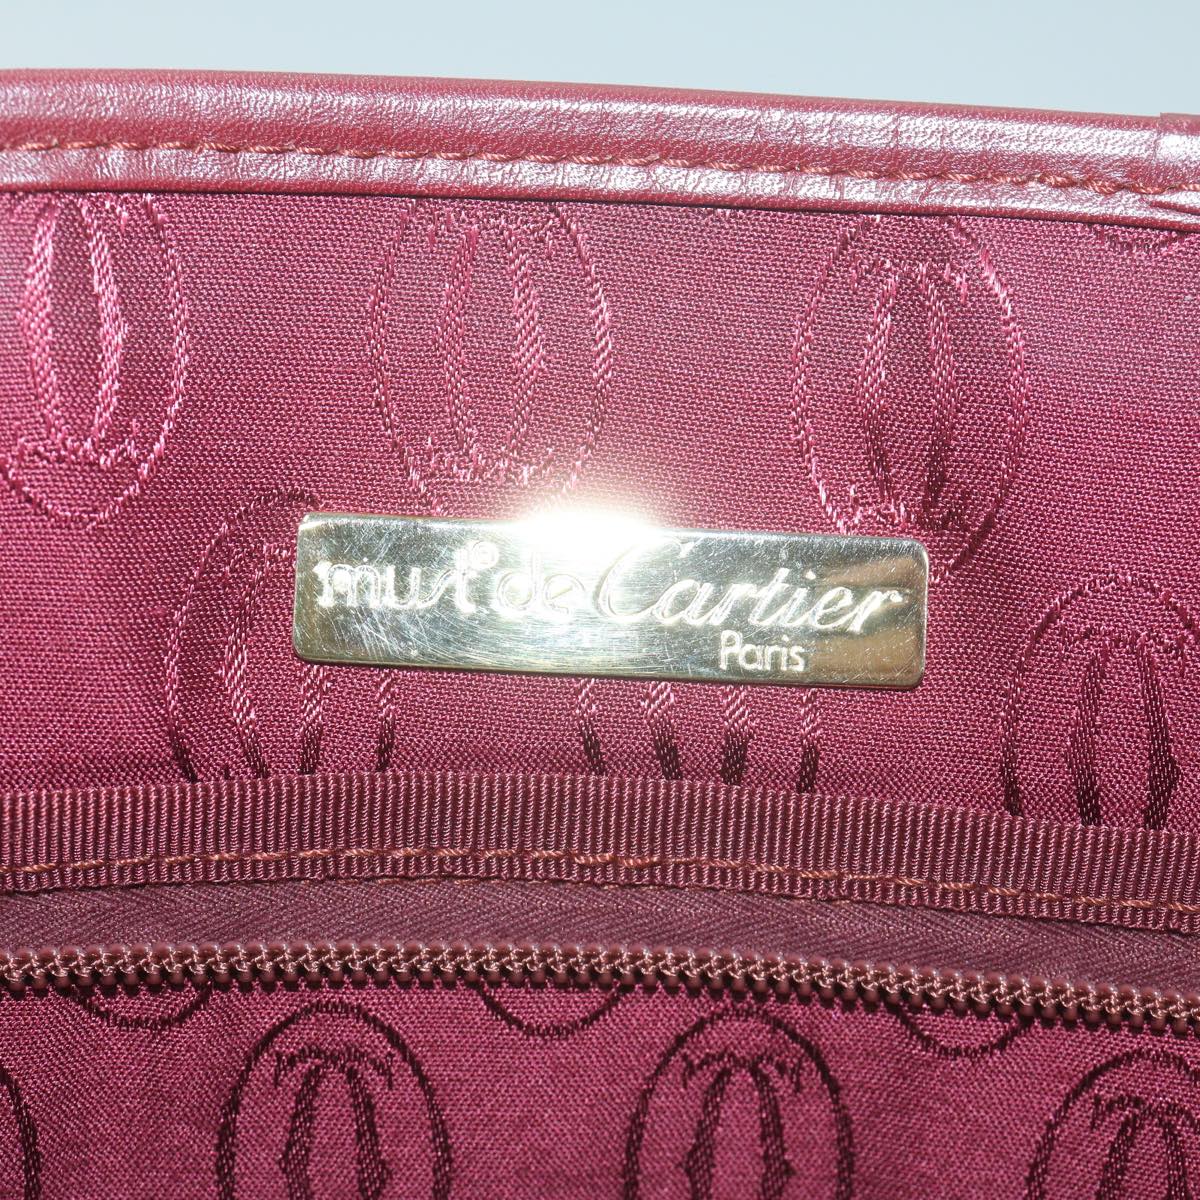 CARTIER Tote Bag Leather Red Auth bs11845